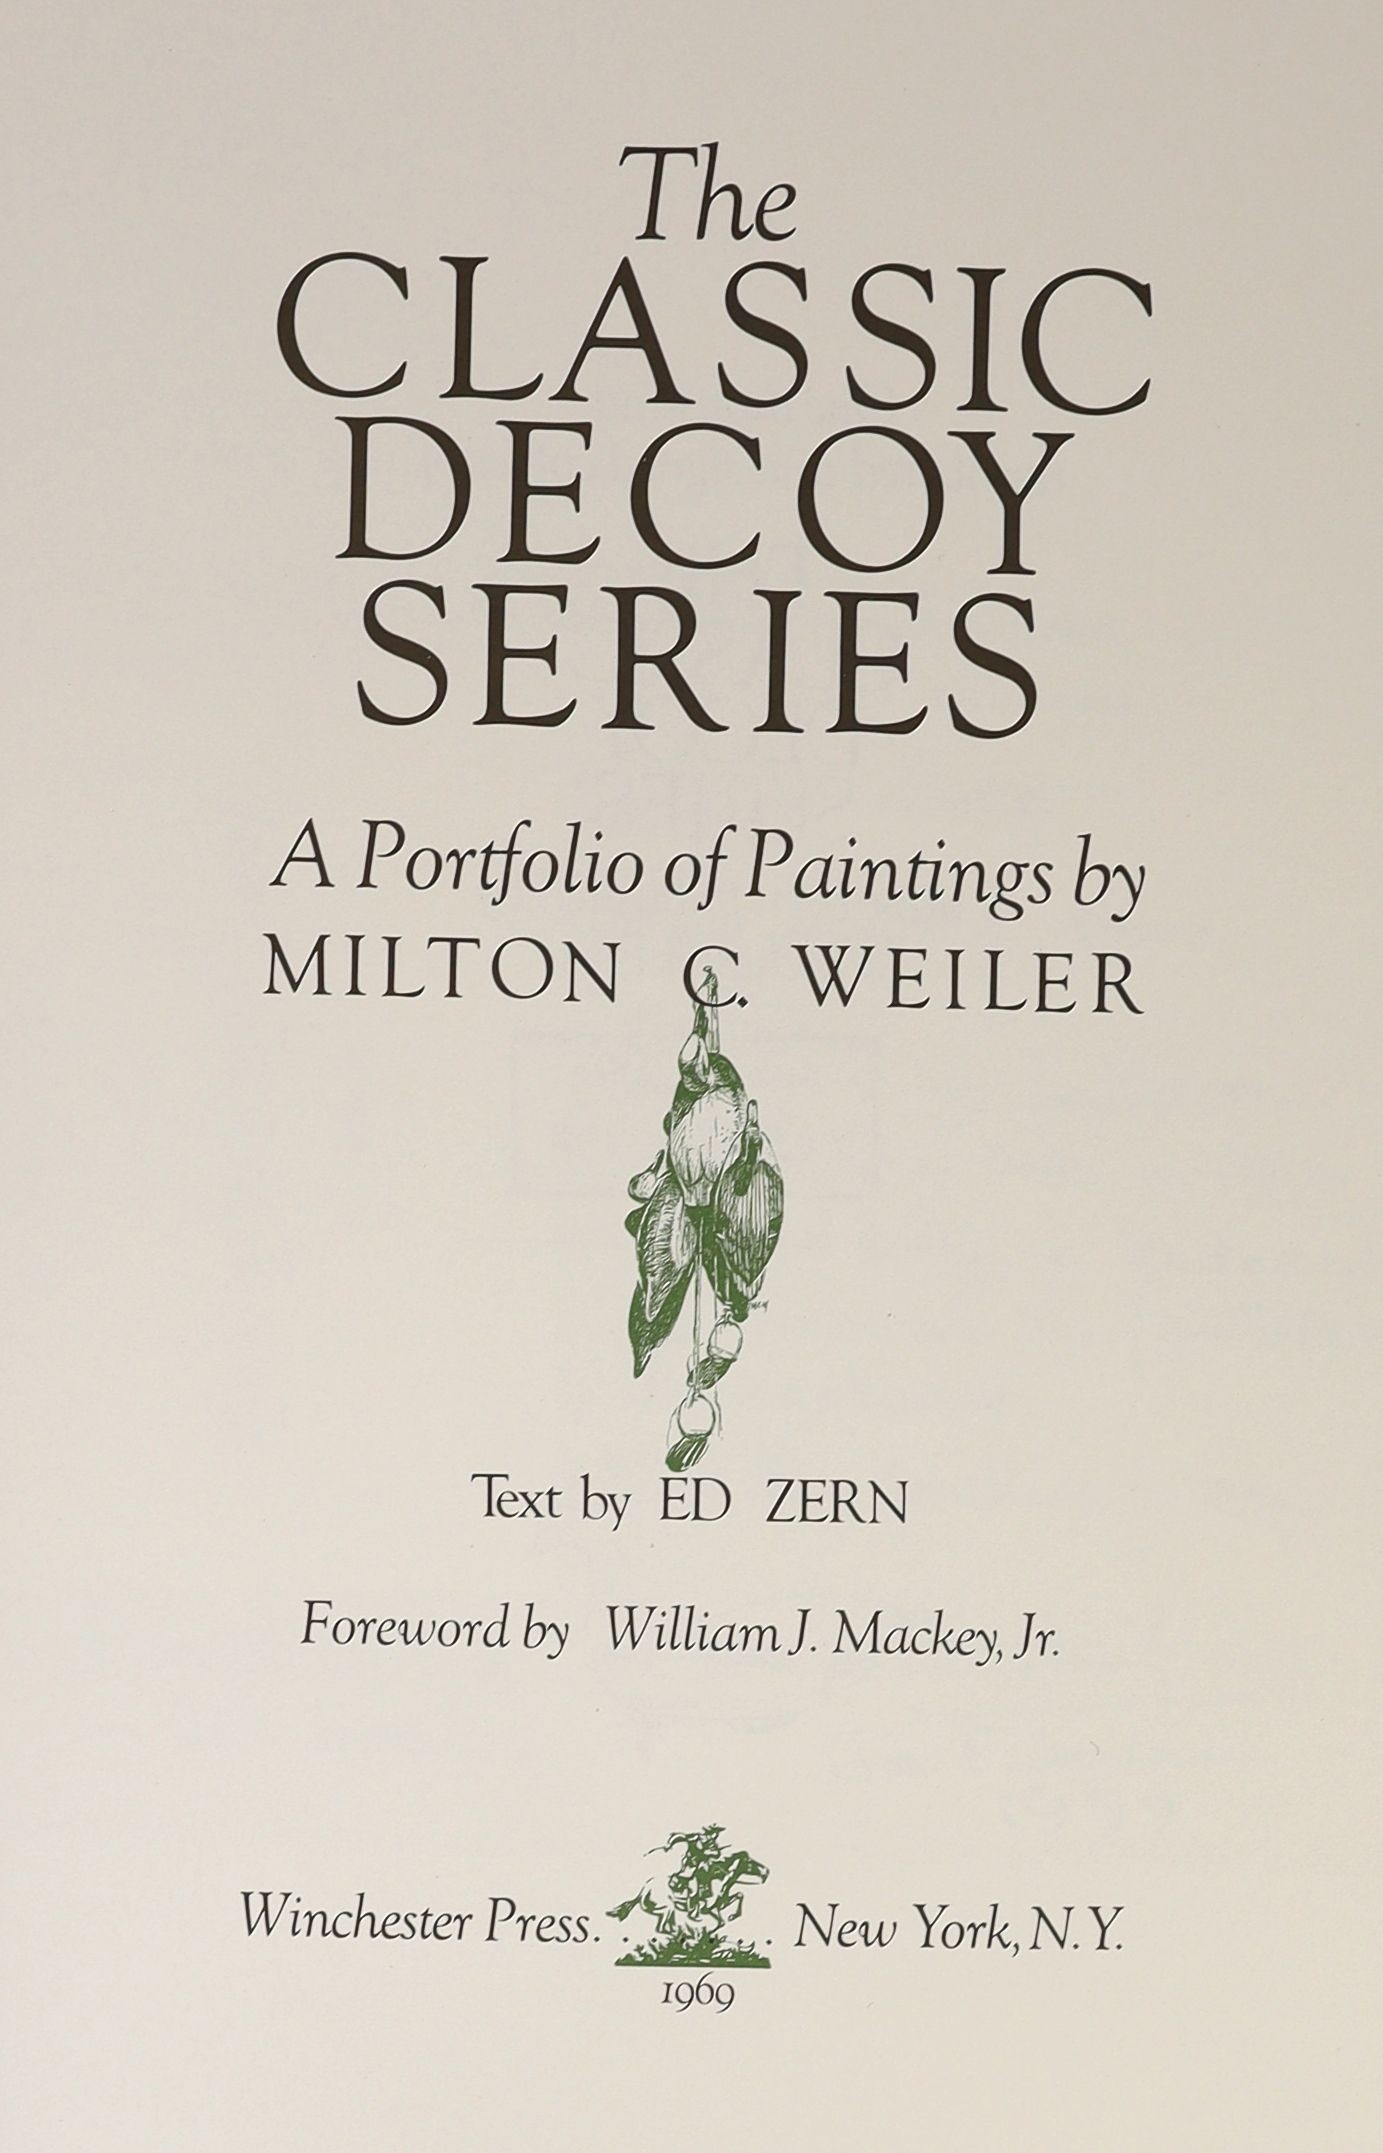 Weiler, Milton C. [Artist] Zern, Ed. [Text] The Classic Decoy Series. A Portfolio of Paintings by Milton C. Weiler. Small folio, Winchester Press, New York 1969. 24 loosely inserted coloured plates, soft cover ribbon bin